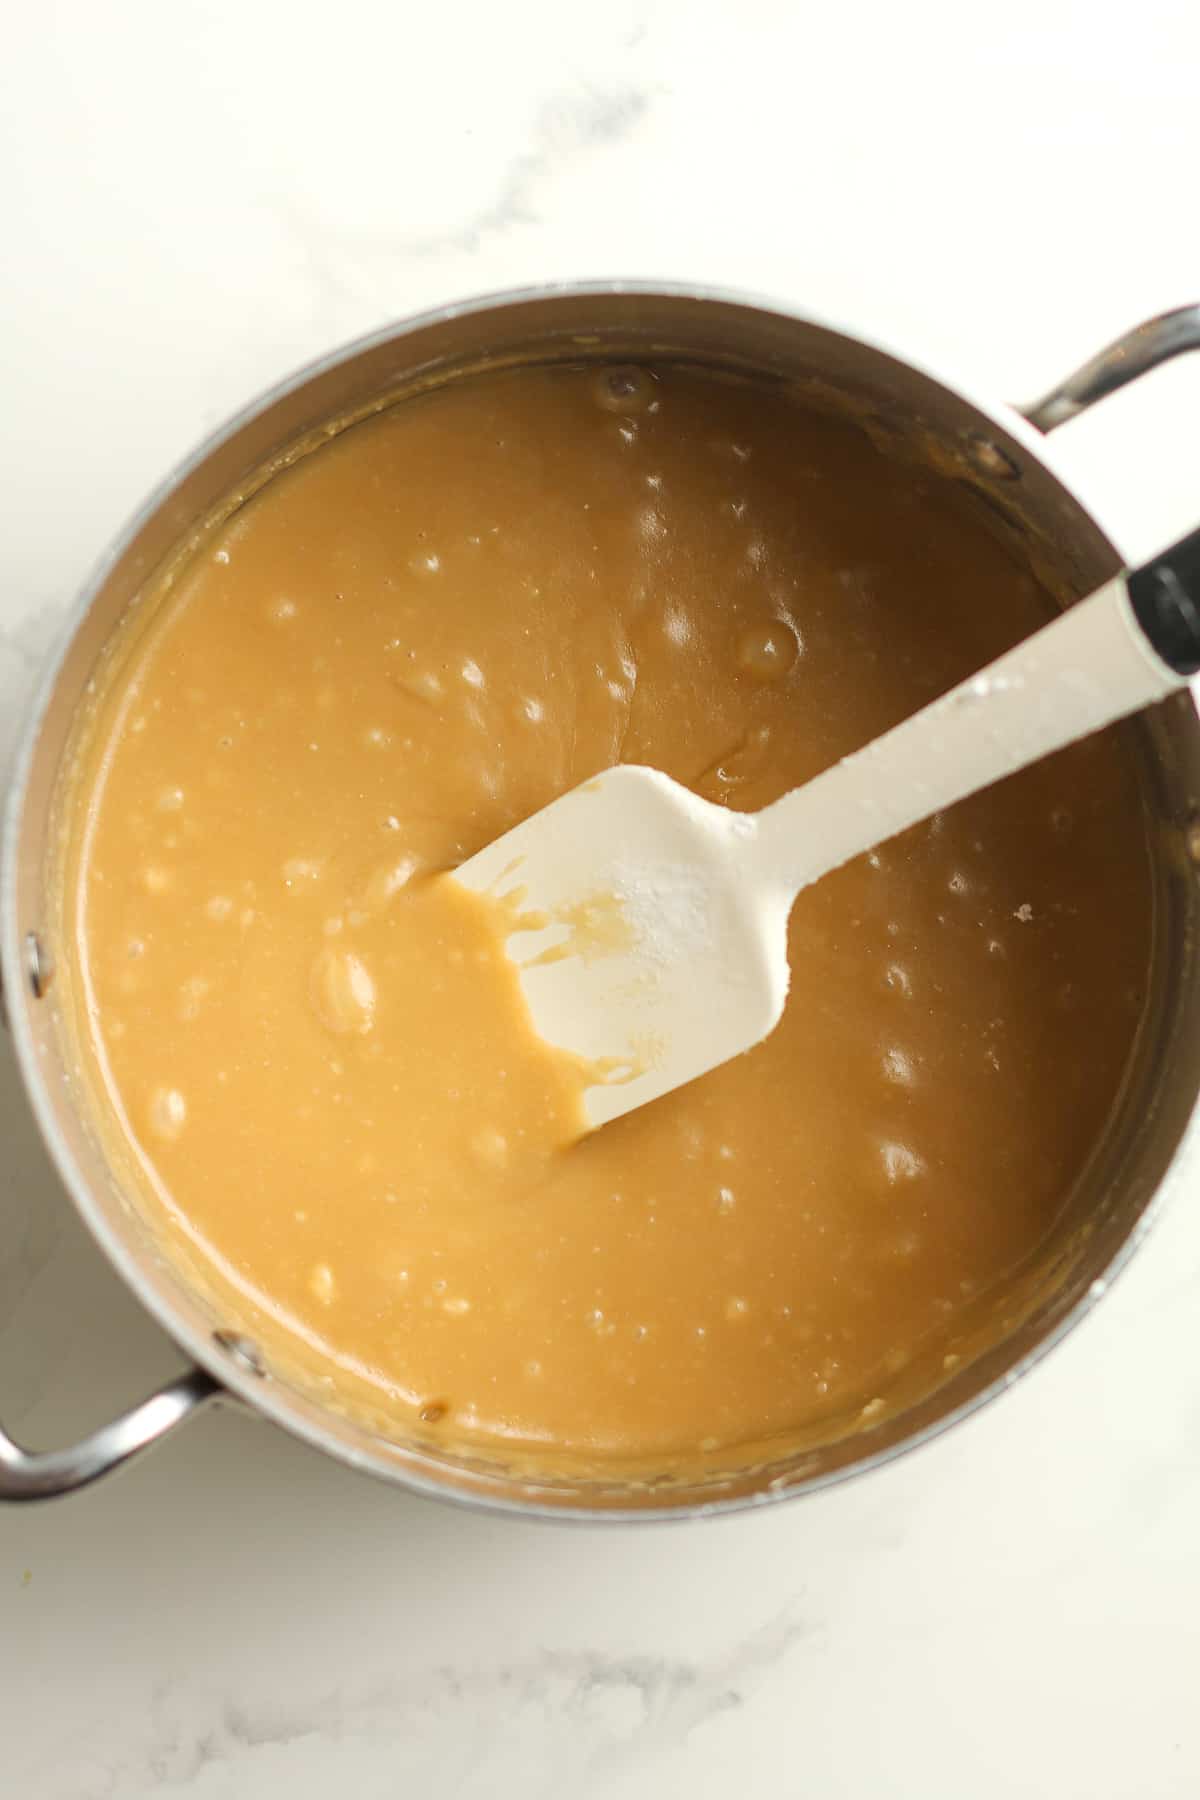 A pan of the just cooked caramel frosting with a spatula.